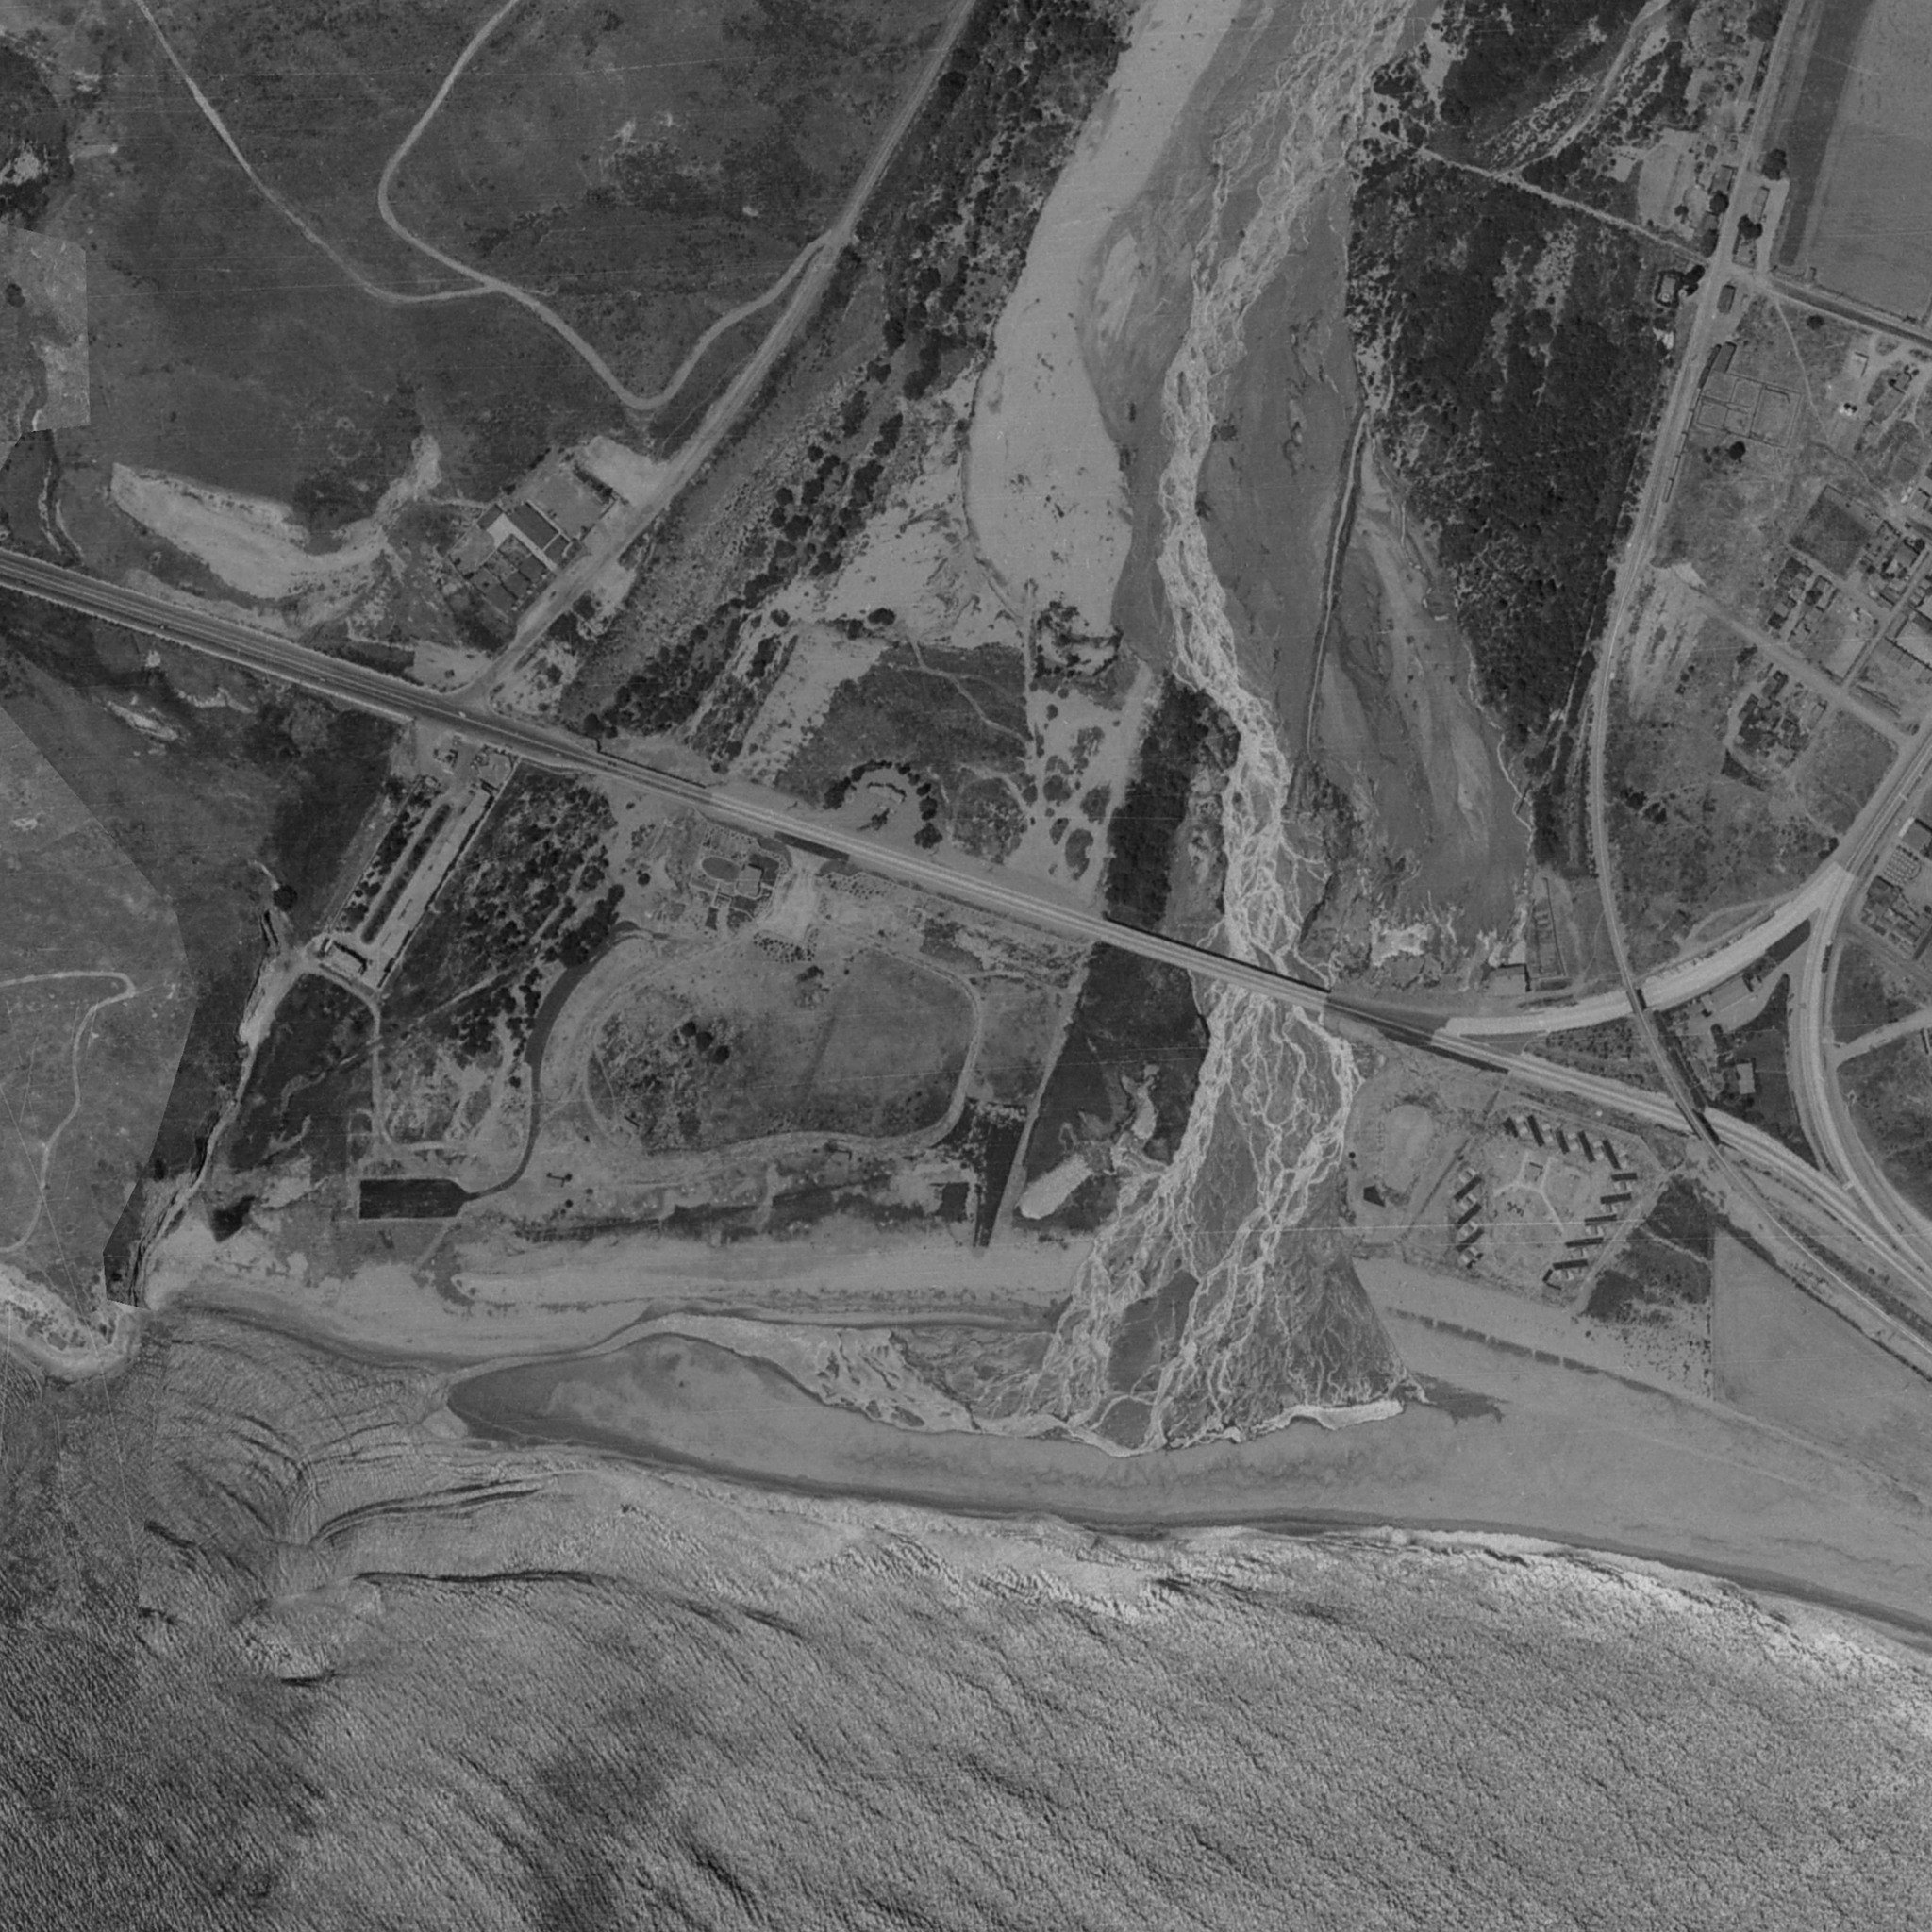 If you&rsquo;re wondering why our beaches are disappearing, check these photos of San Juan Creek &mdash; the main source of sediment for all the beaches between Dana Point and Trestles.

The black and white photos are from 1938. Note how the riverbed